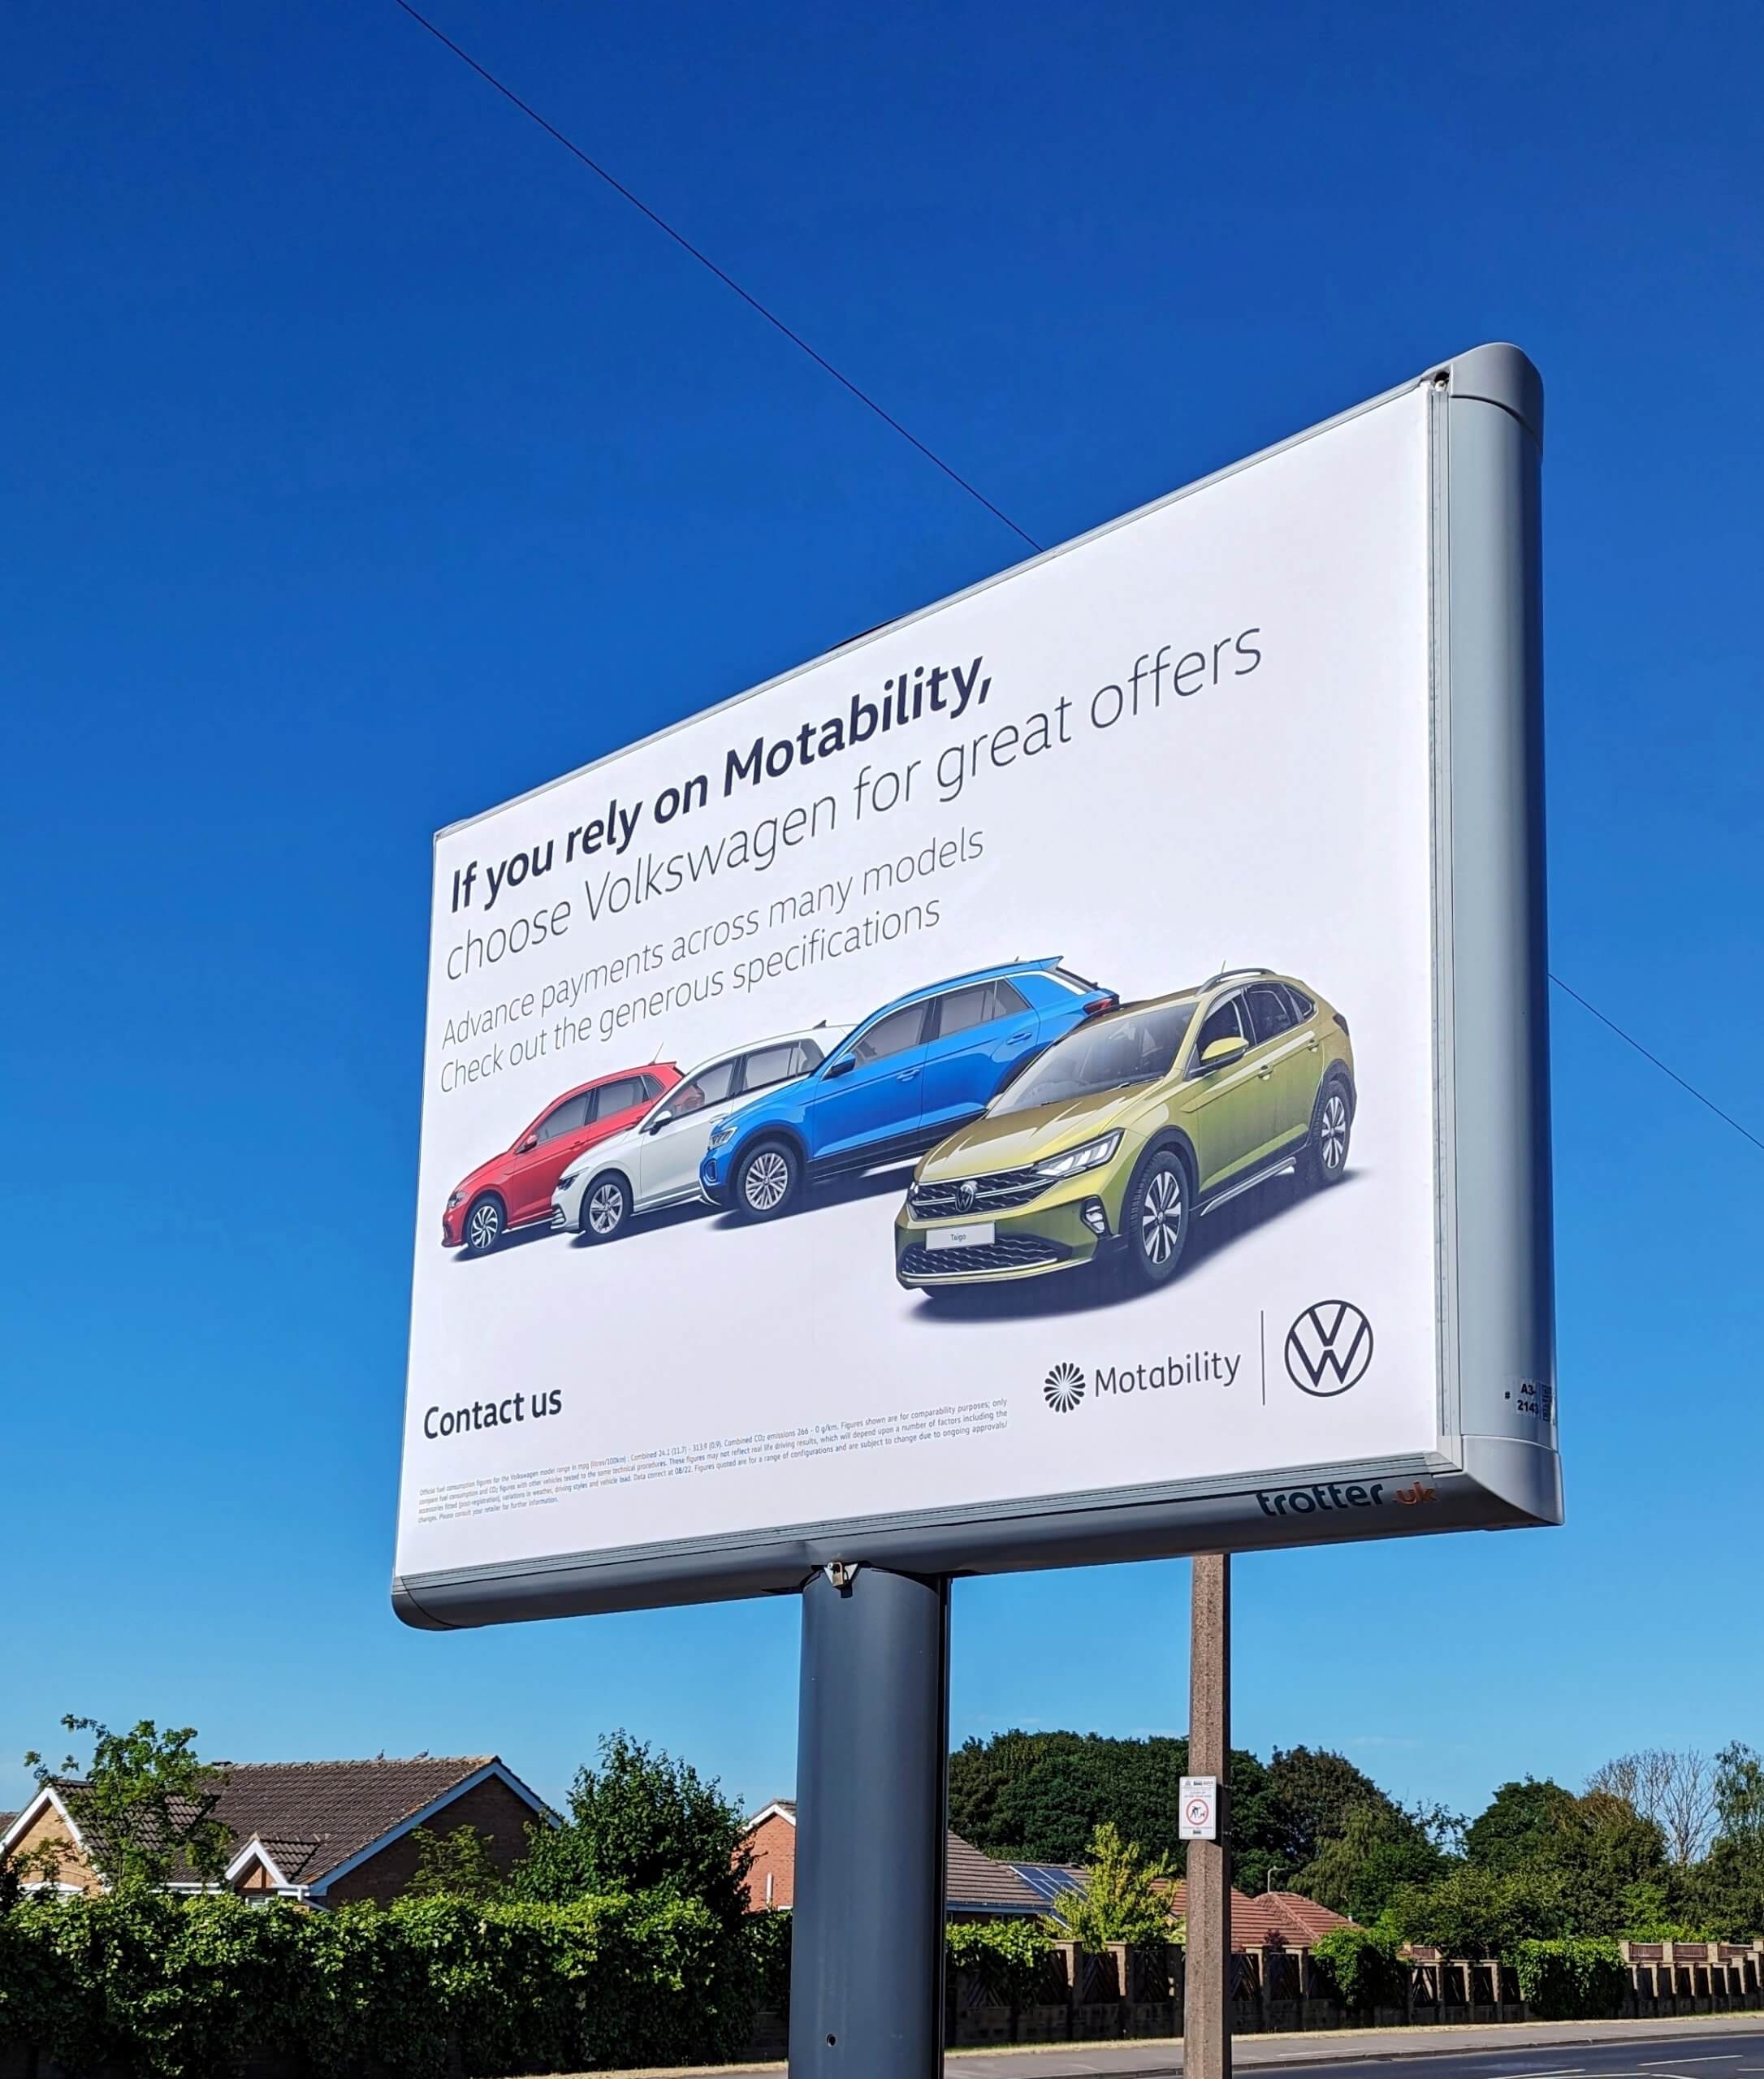 Large billboard sign for Volkswagon with cars on a white background. Poster reads 'if you rely on motability'